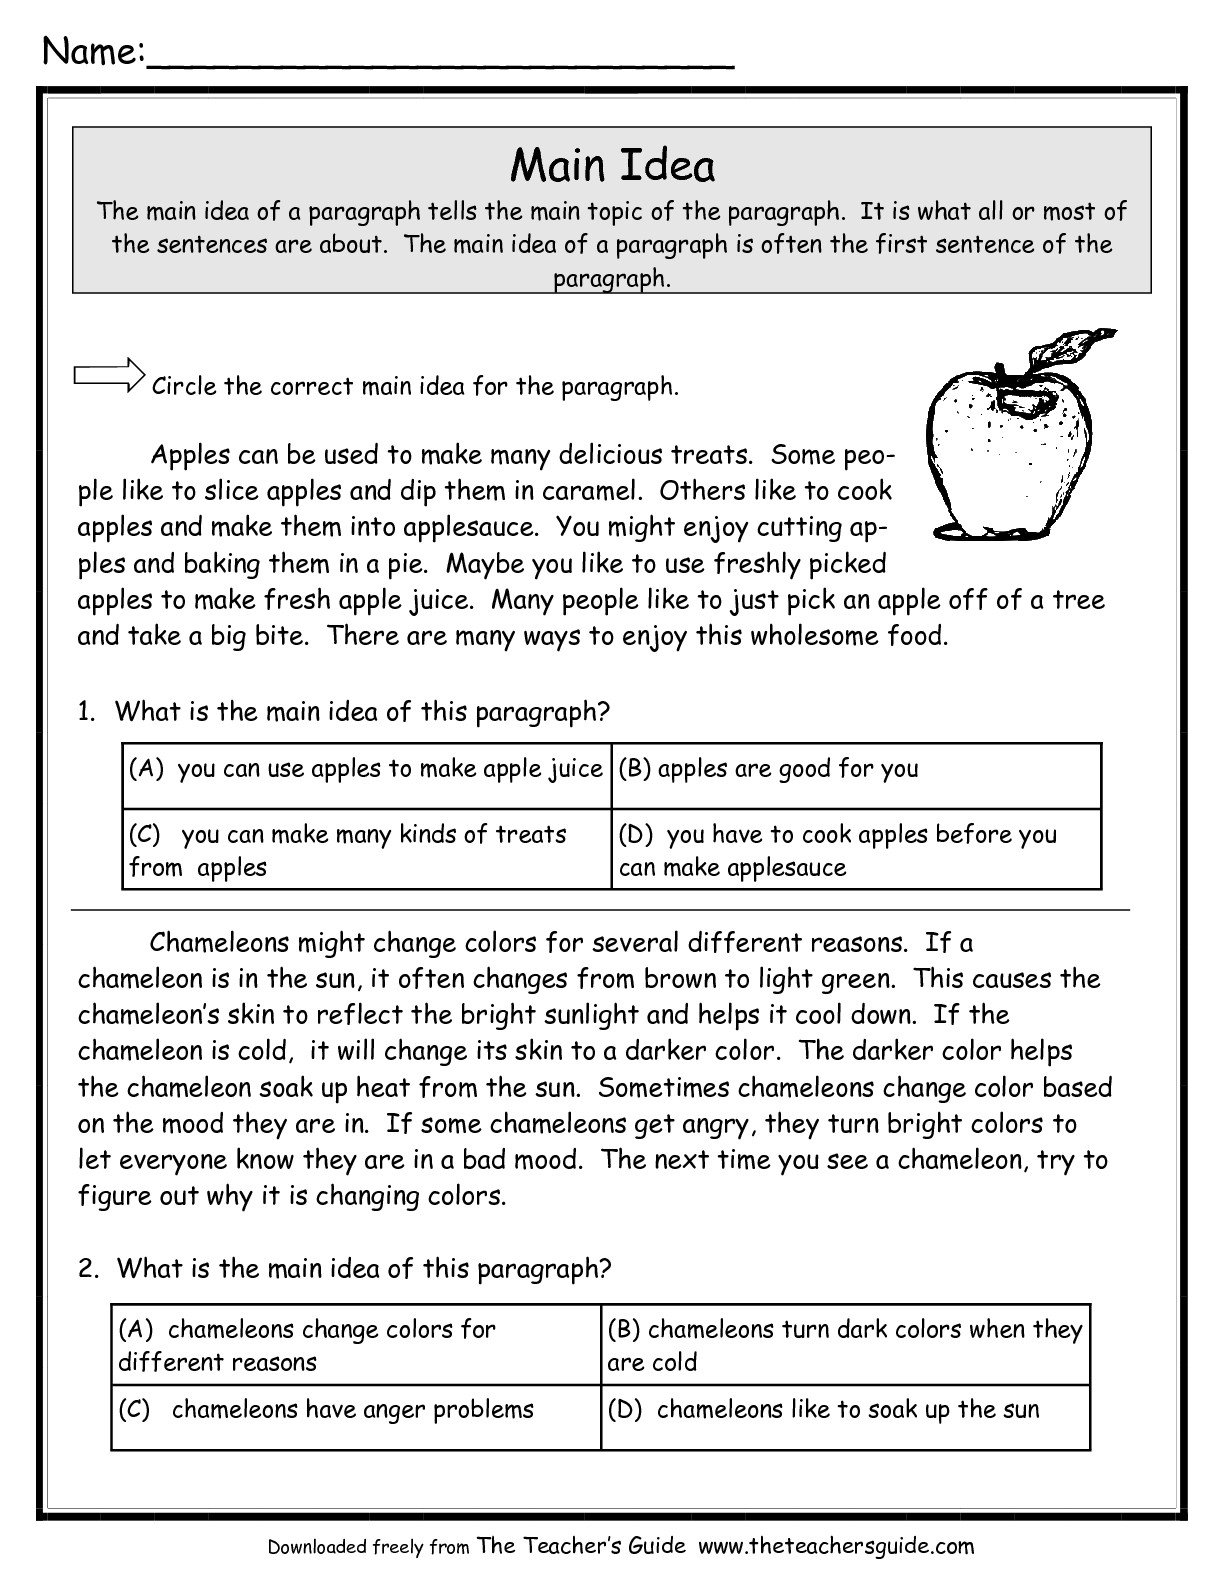 10 Cute Main Idea And Supporting Details Activities main idea worksheets from the teachers guide 5 2022